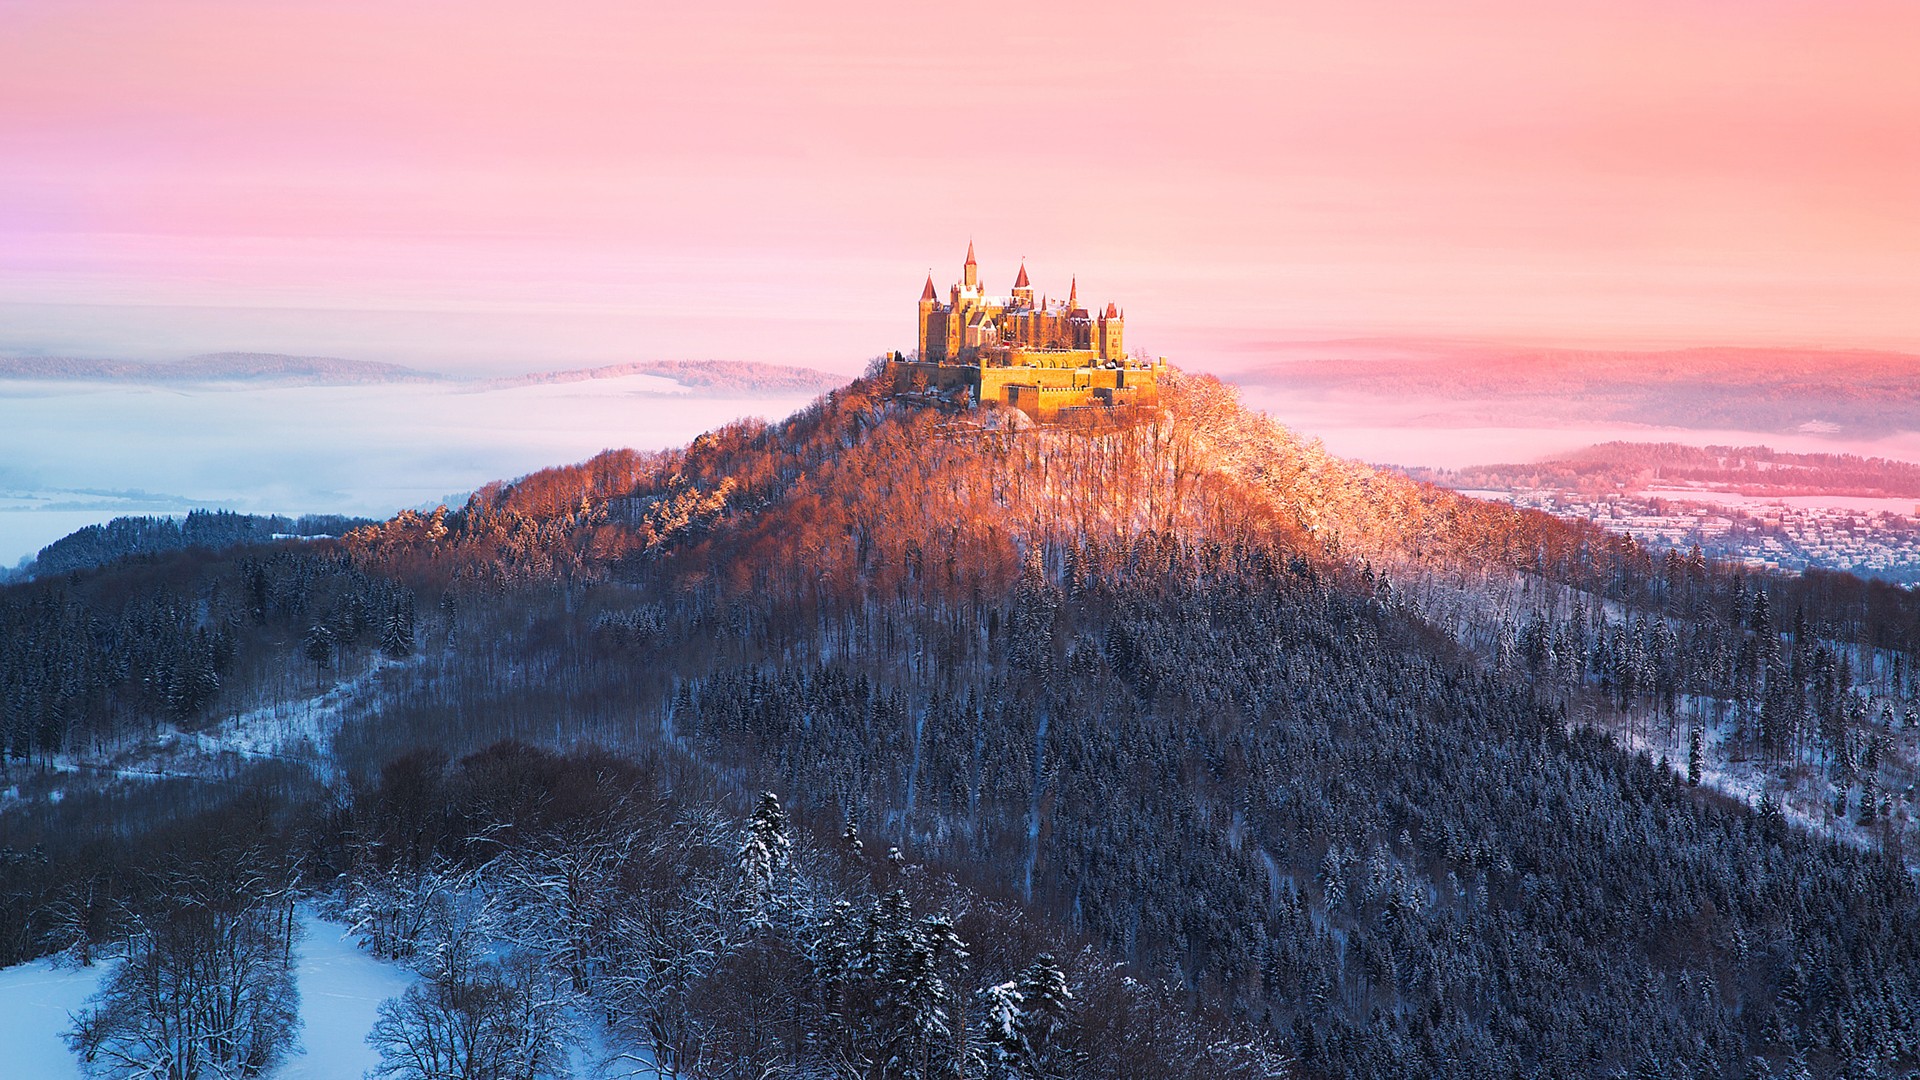 Free download wallpaper Castles, Mountain, Forest, Man Made, Castle on your PC desktop